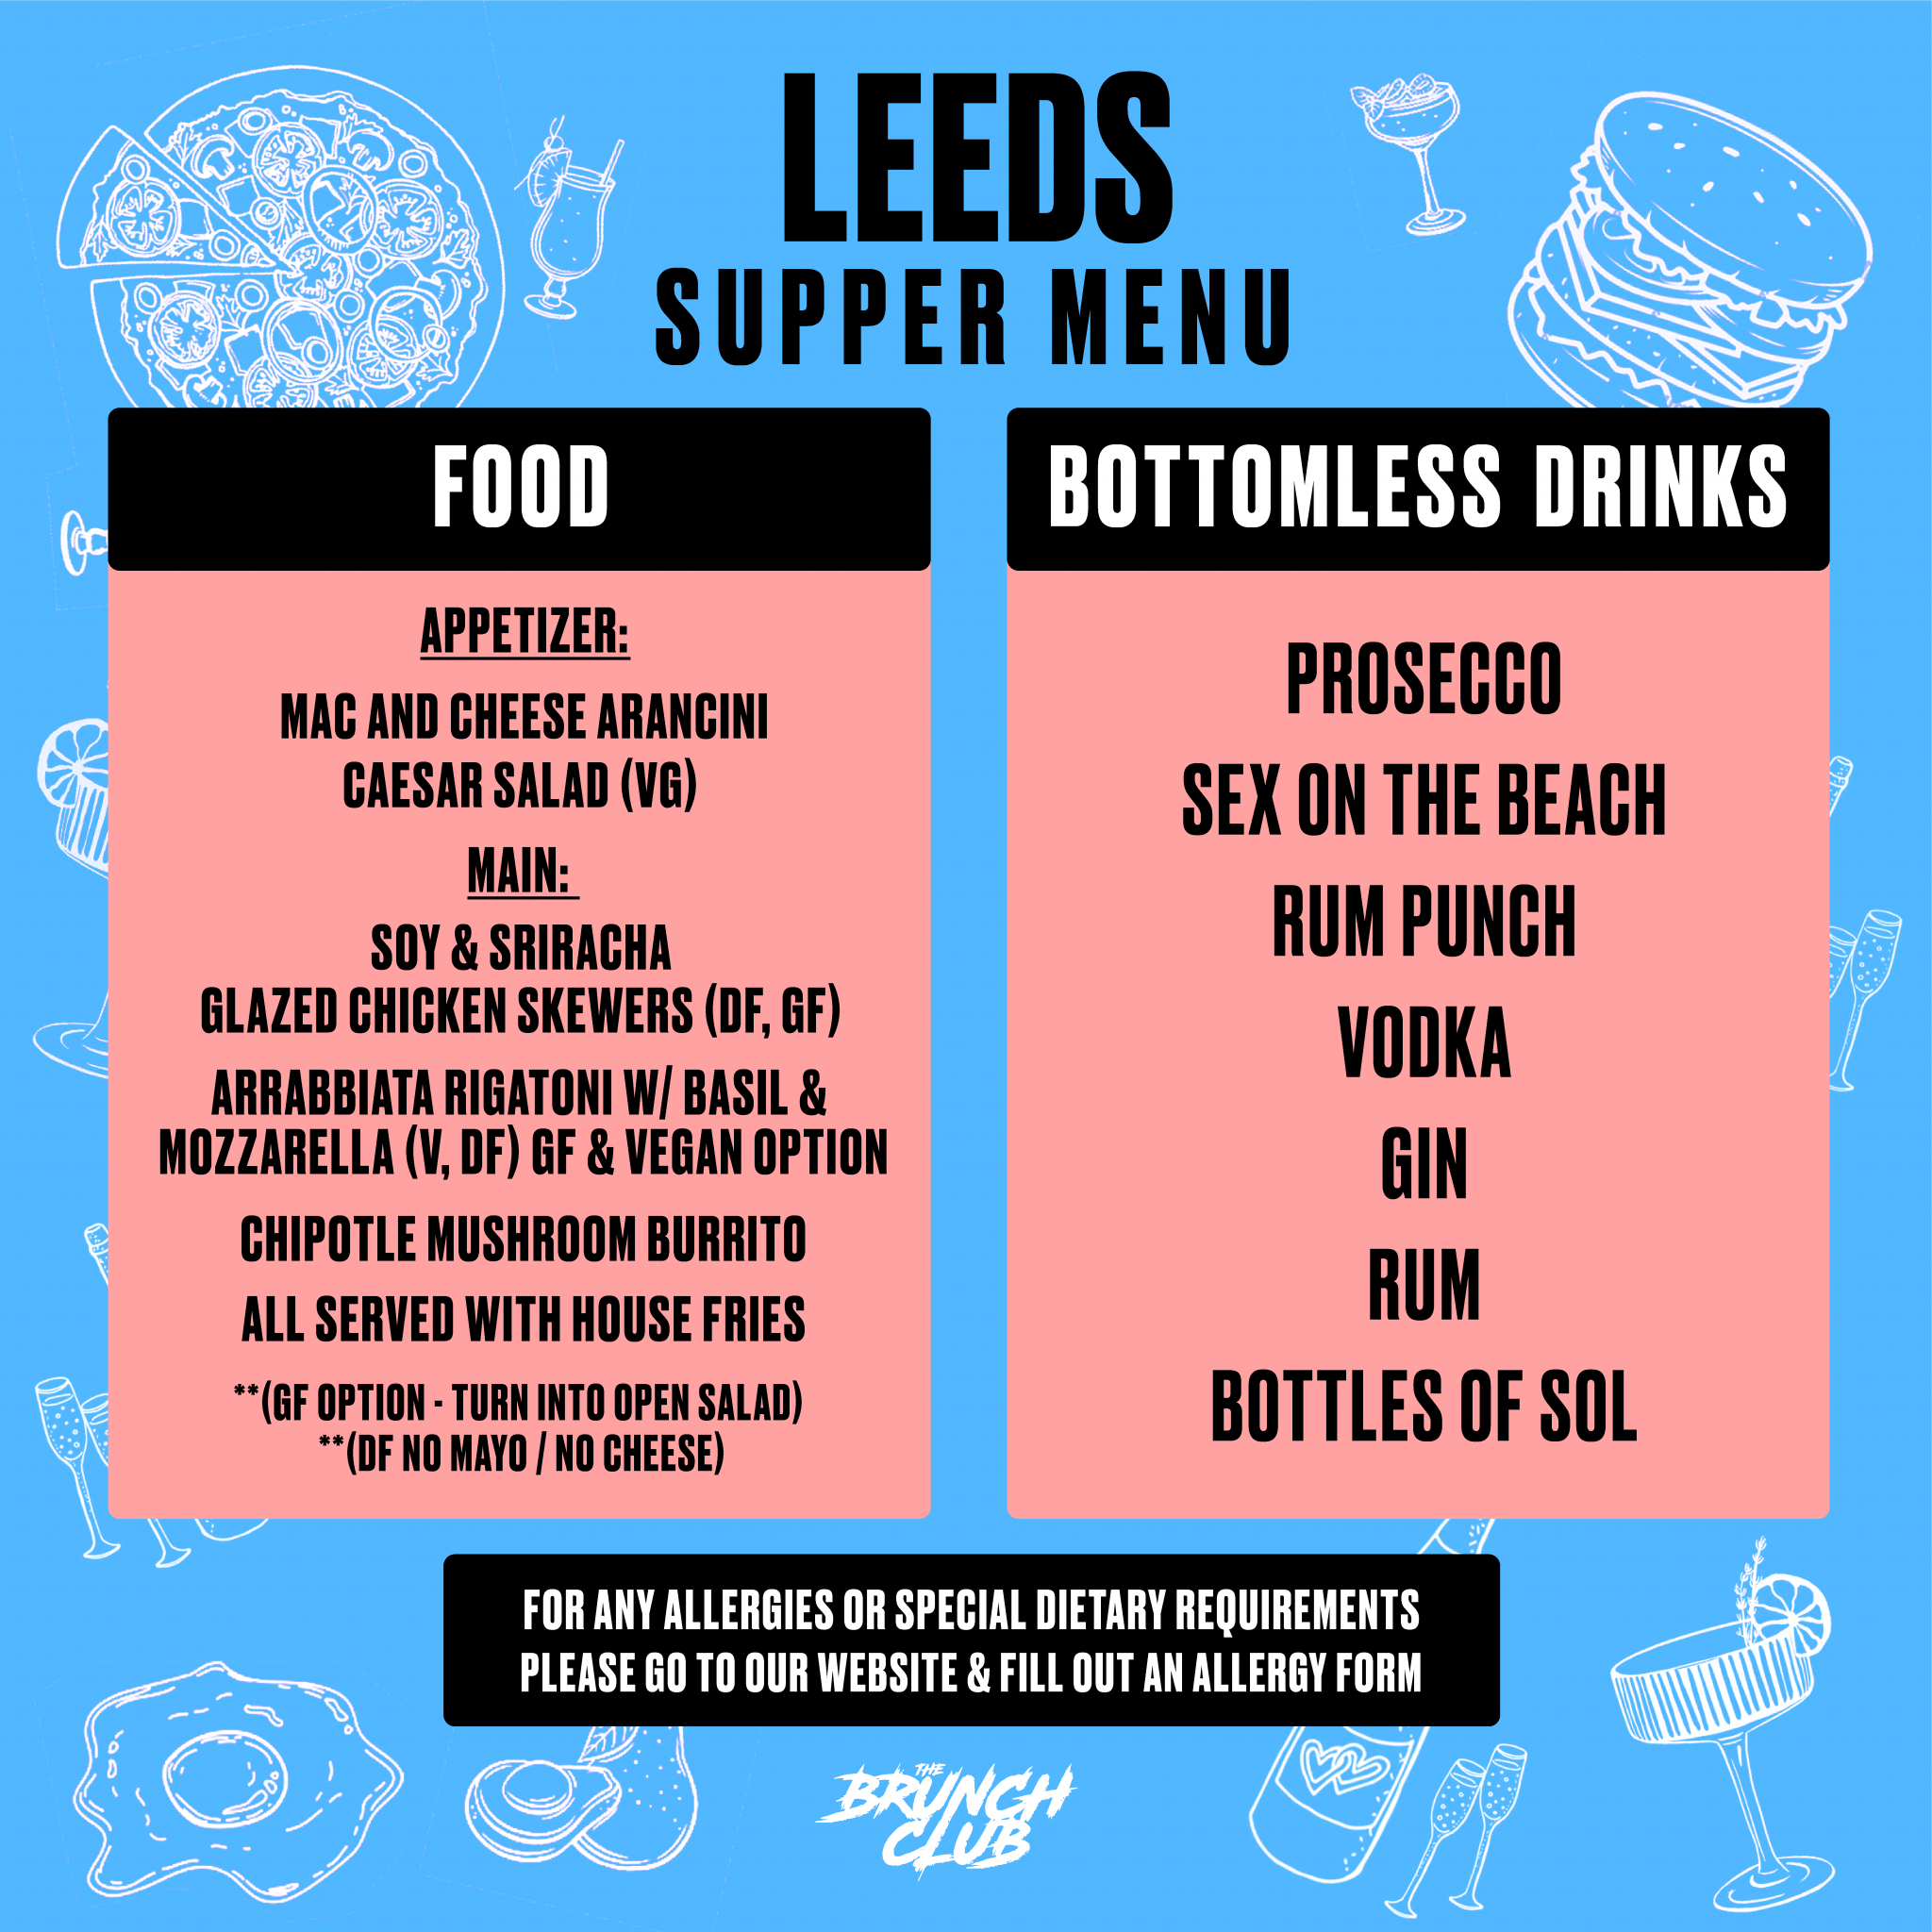 CANCELLED 90's Baby Bottomless Supper - Leeds